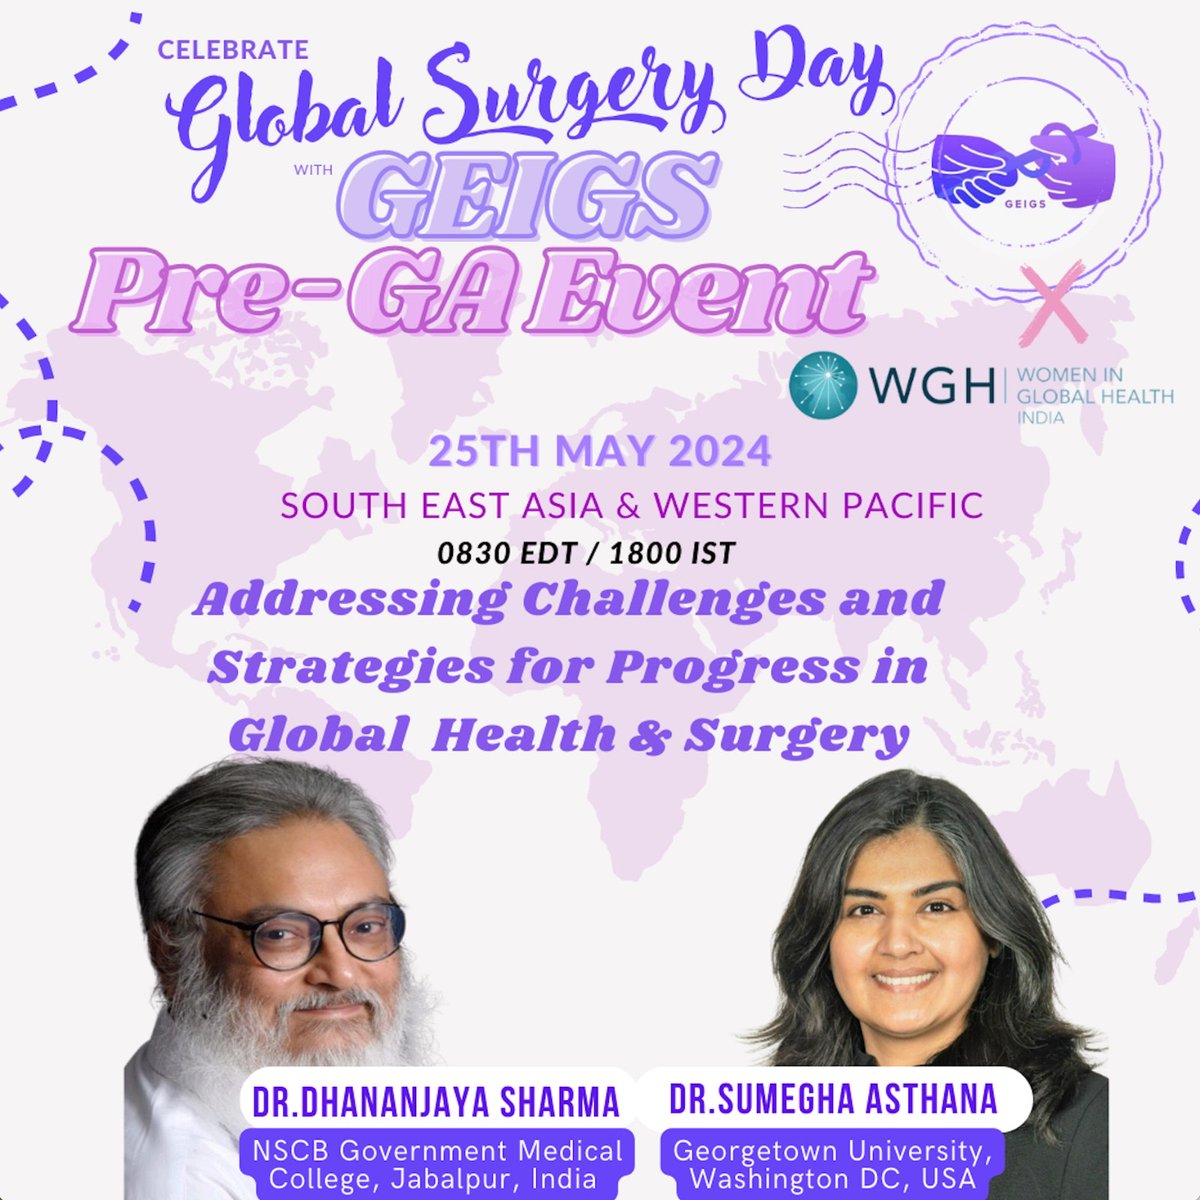 Exciting Announcement! 📢 Join @sumeghaasthana & @Dhananjayasha19 for a virtual event on #GlobalSurgeryDay, as they delve into challenges and strategies for progress in global health & surgery 🏥🌏 📅 25th May ⏰ 08:30 EDT / 18:00 IST 🔗 shorturl.at/mDENZ @gendereqsurg